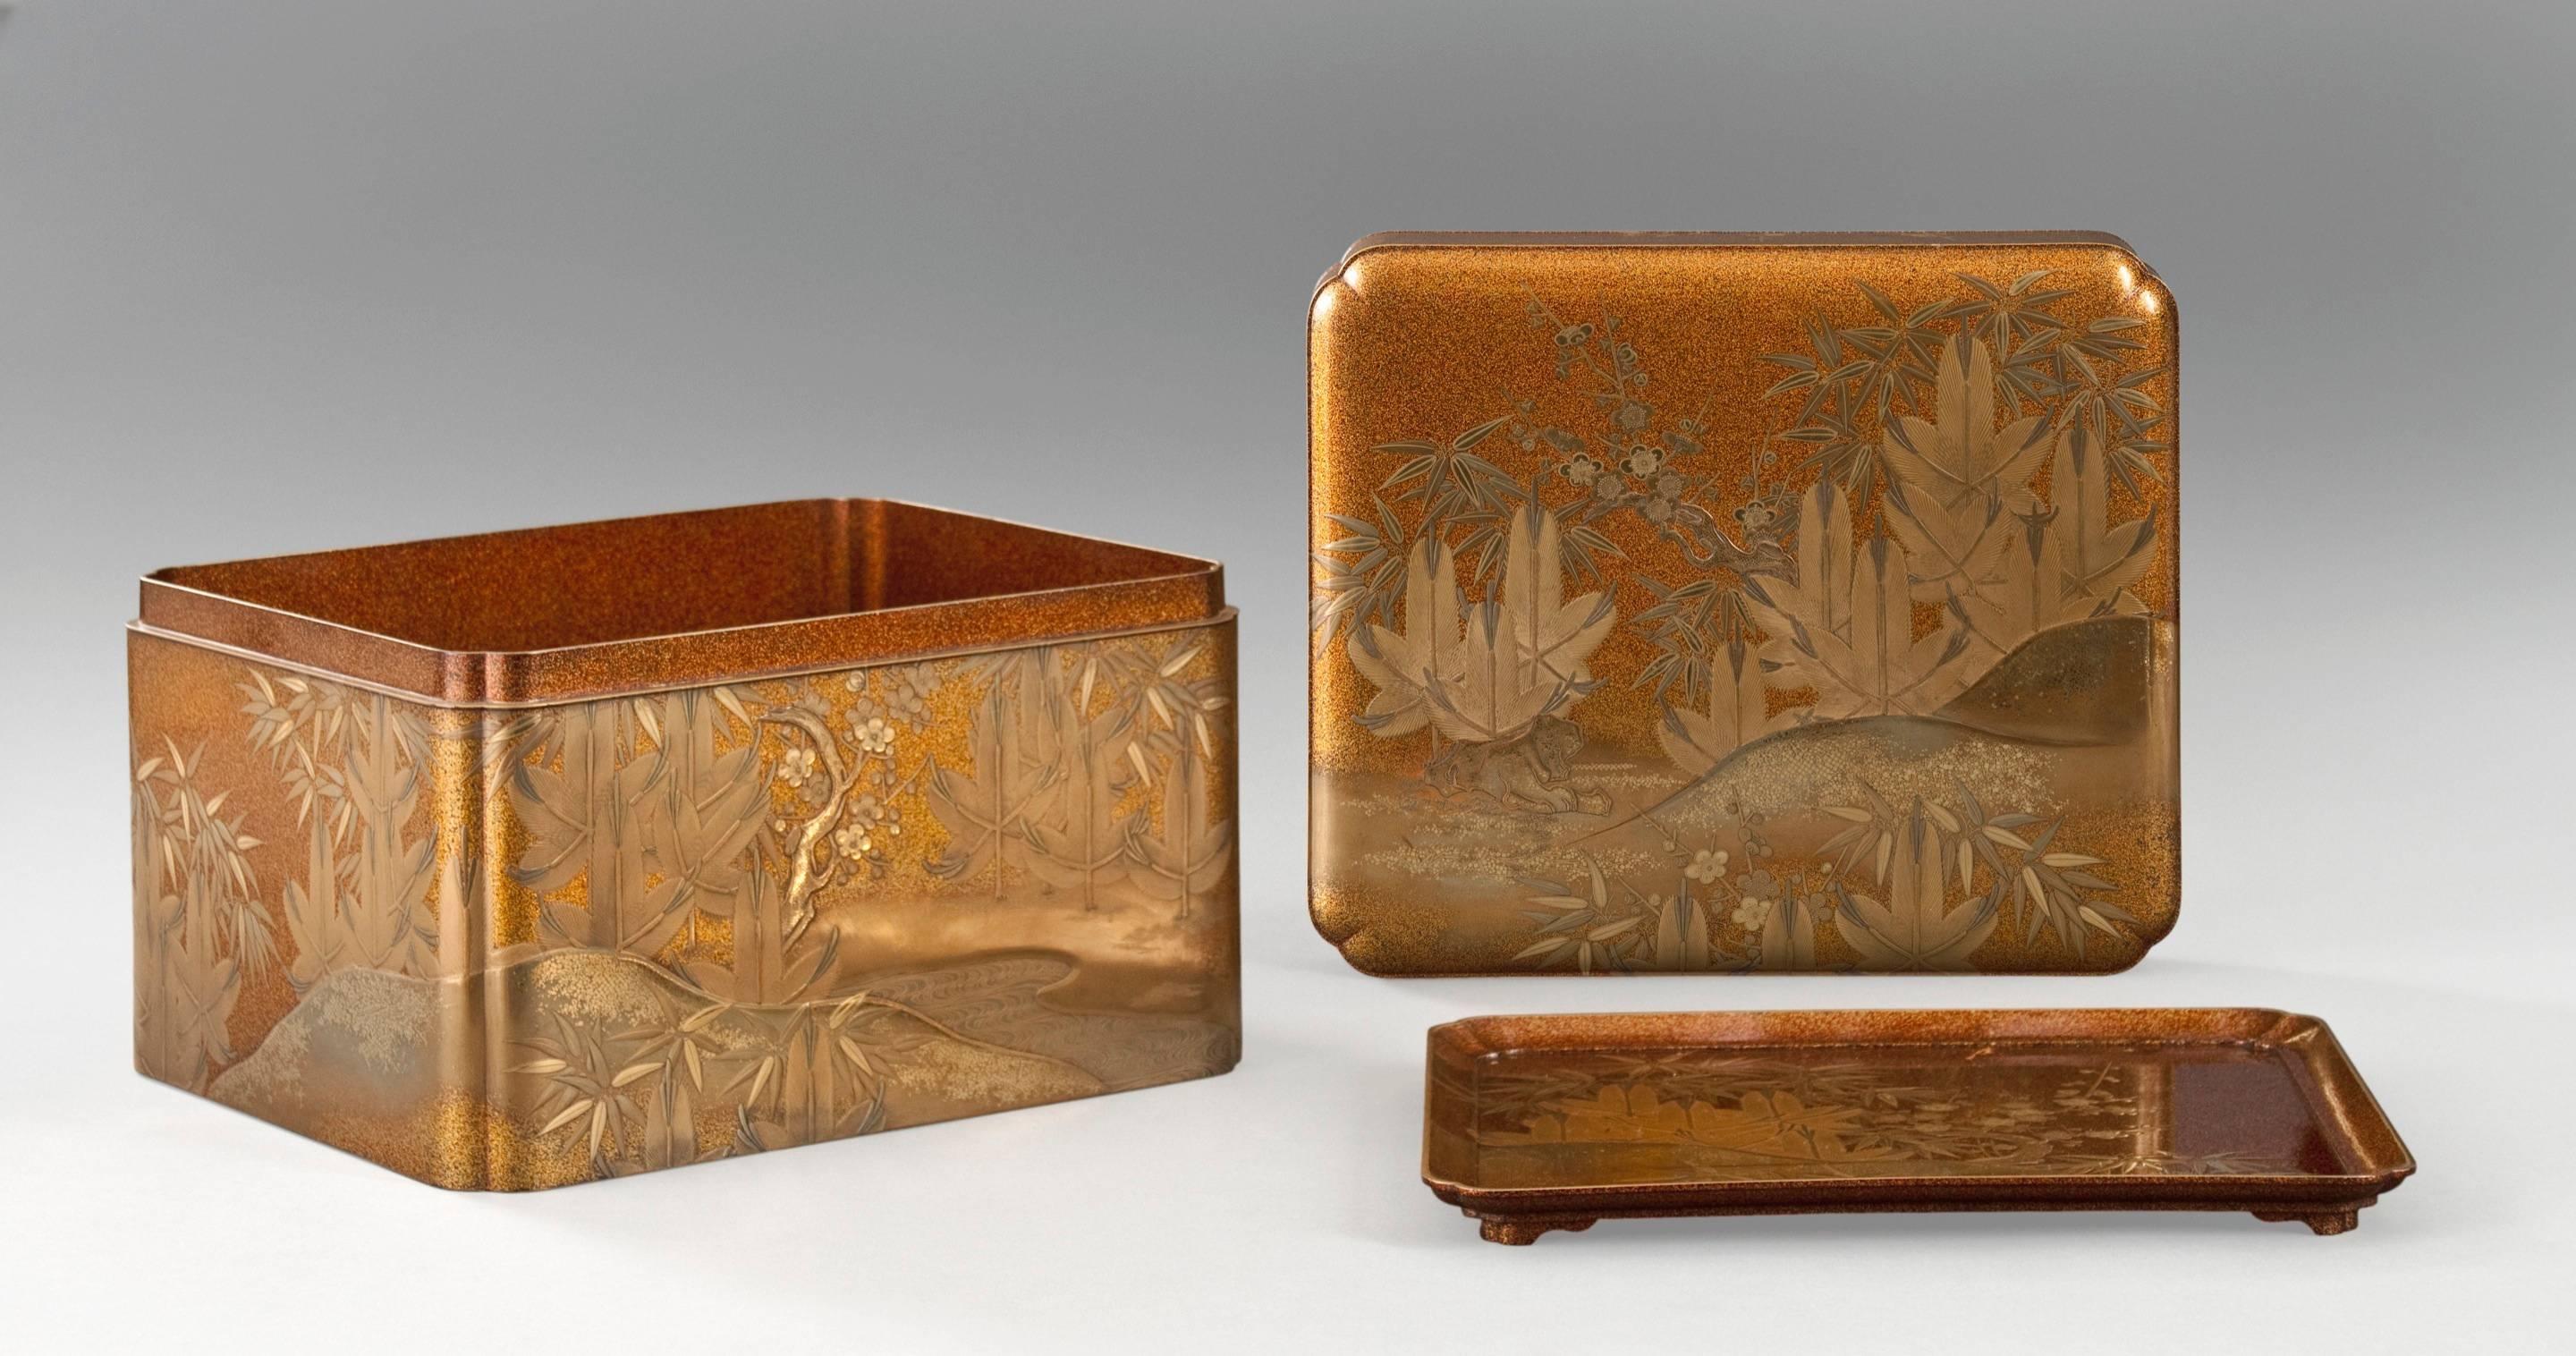 Of rectangular form with recessed corners, the top and sides depicting the three friends of winter (bamboo, pine and plum) growing amongst small rock formations, the interior tray depicting similar scenery and terminating in shaped feet, all in gold